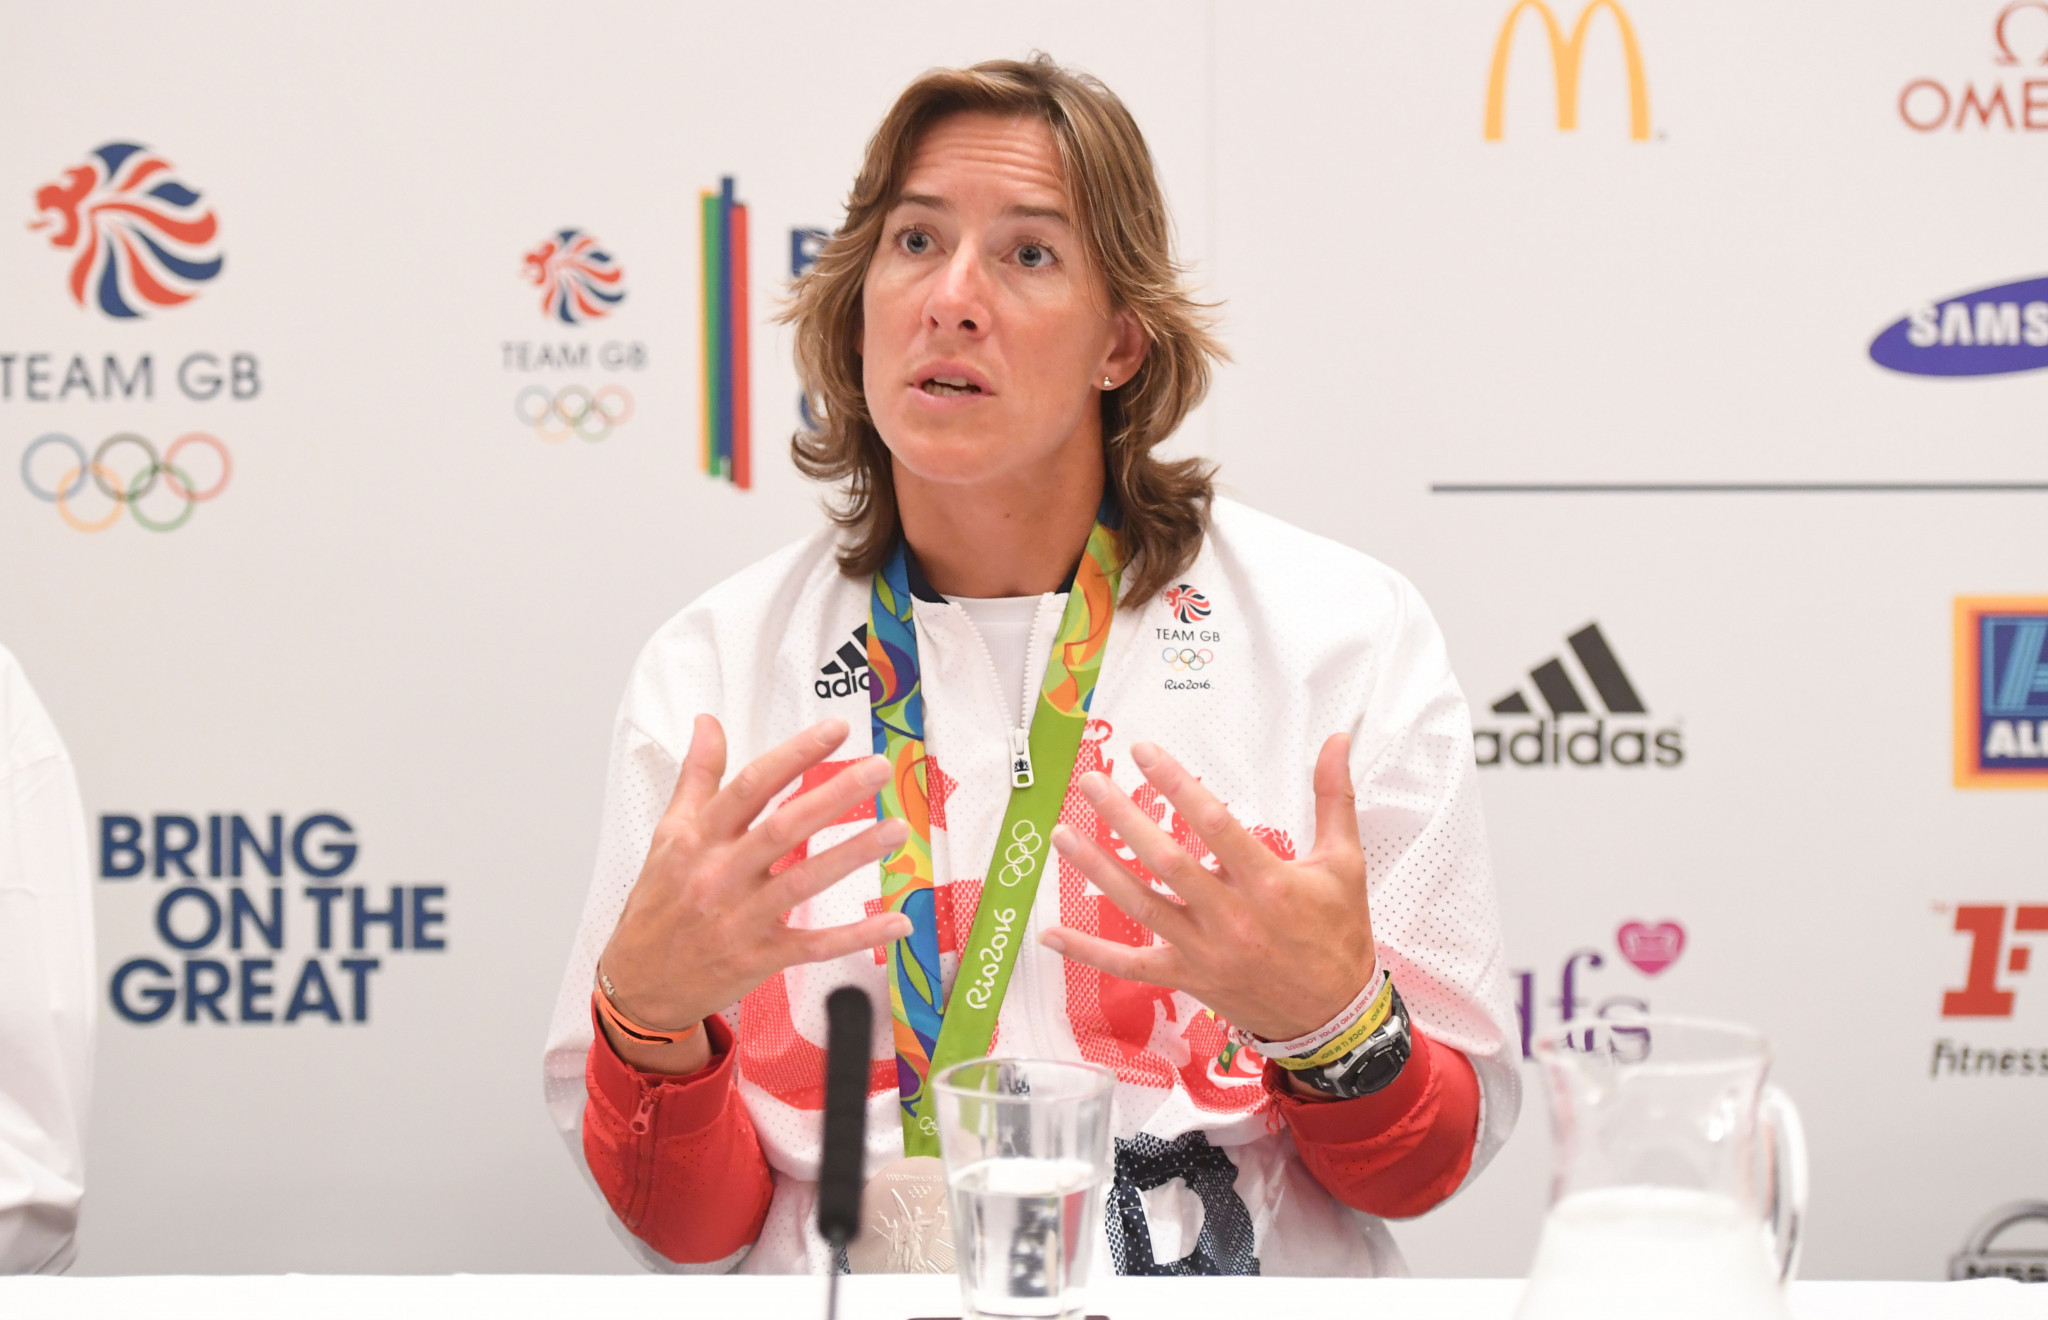 Great Britain's six-time world champion Katherine Grainger won the Thomas Keller medal last year ©Getty Images